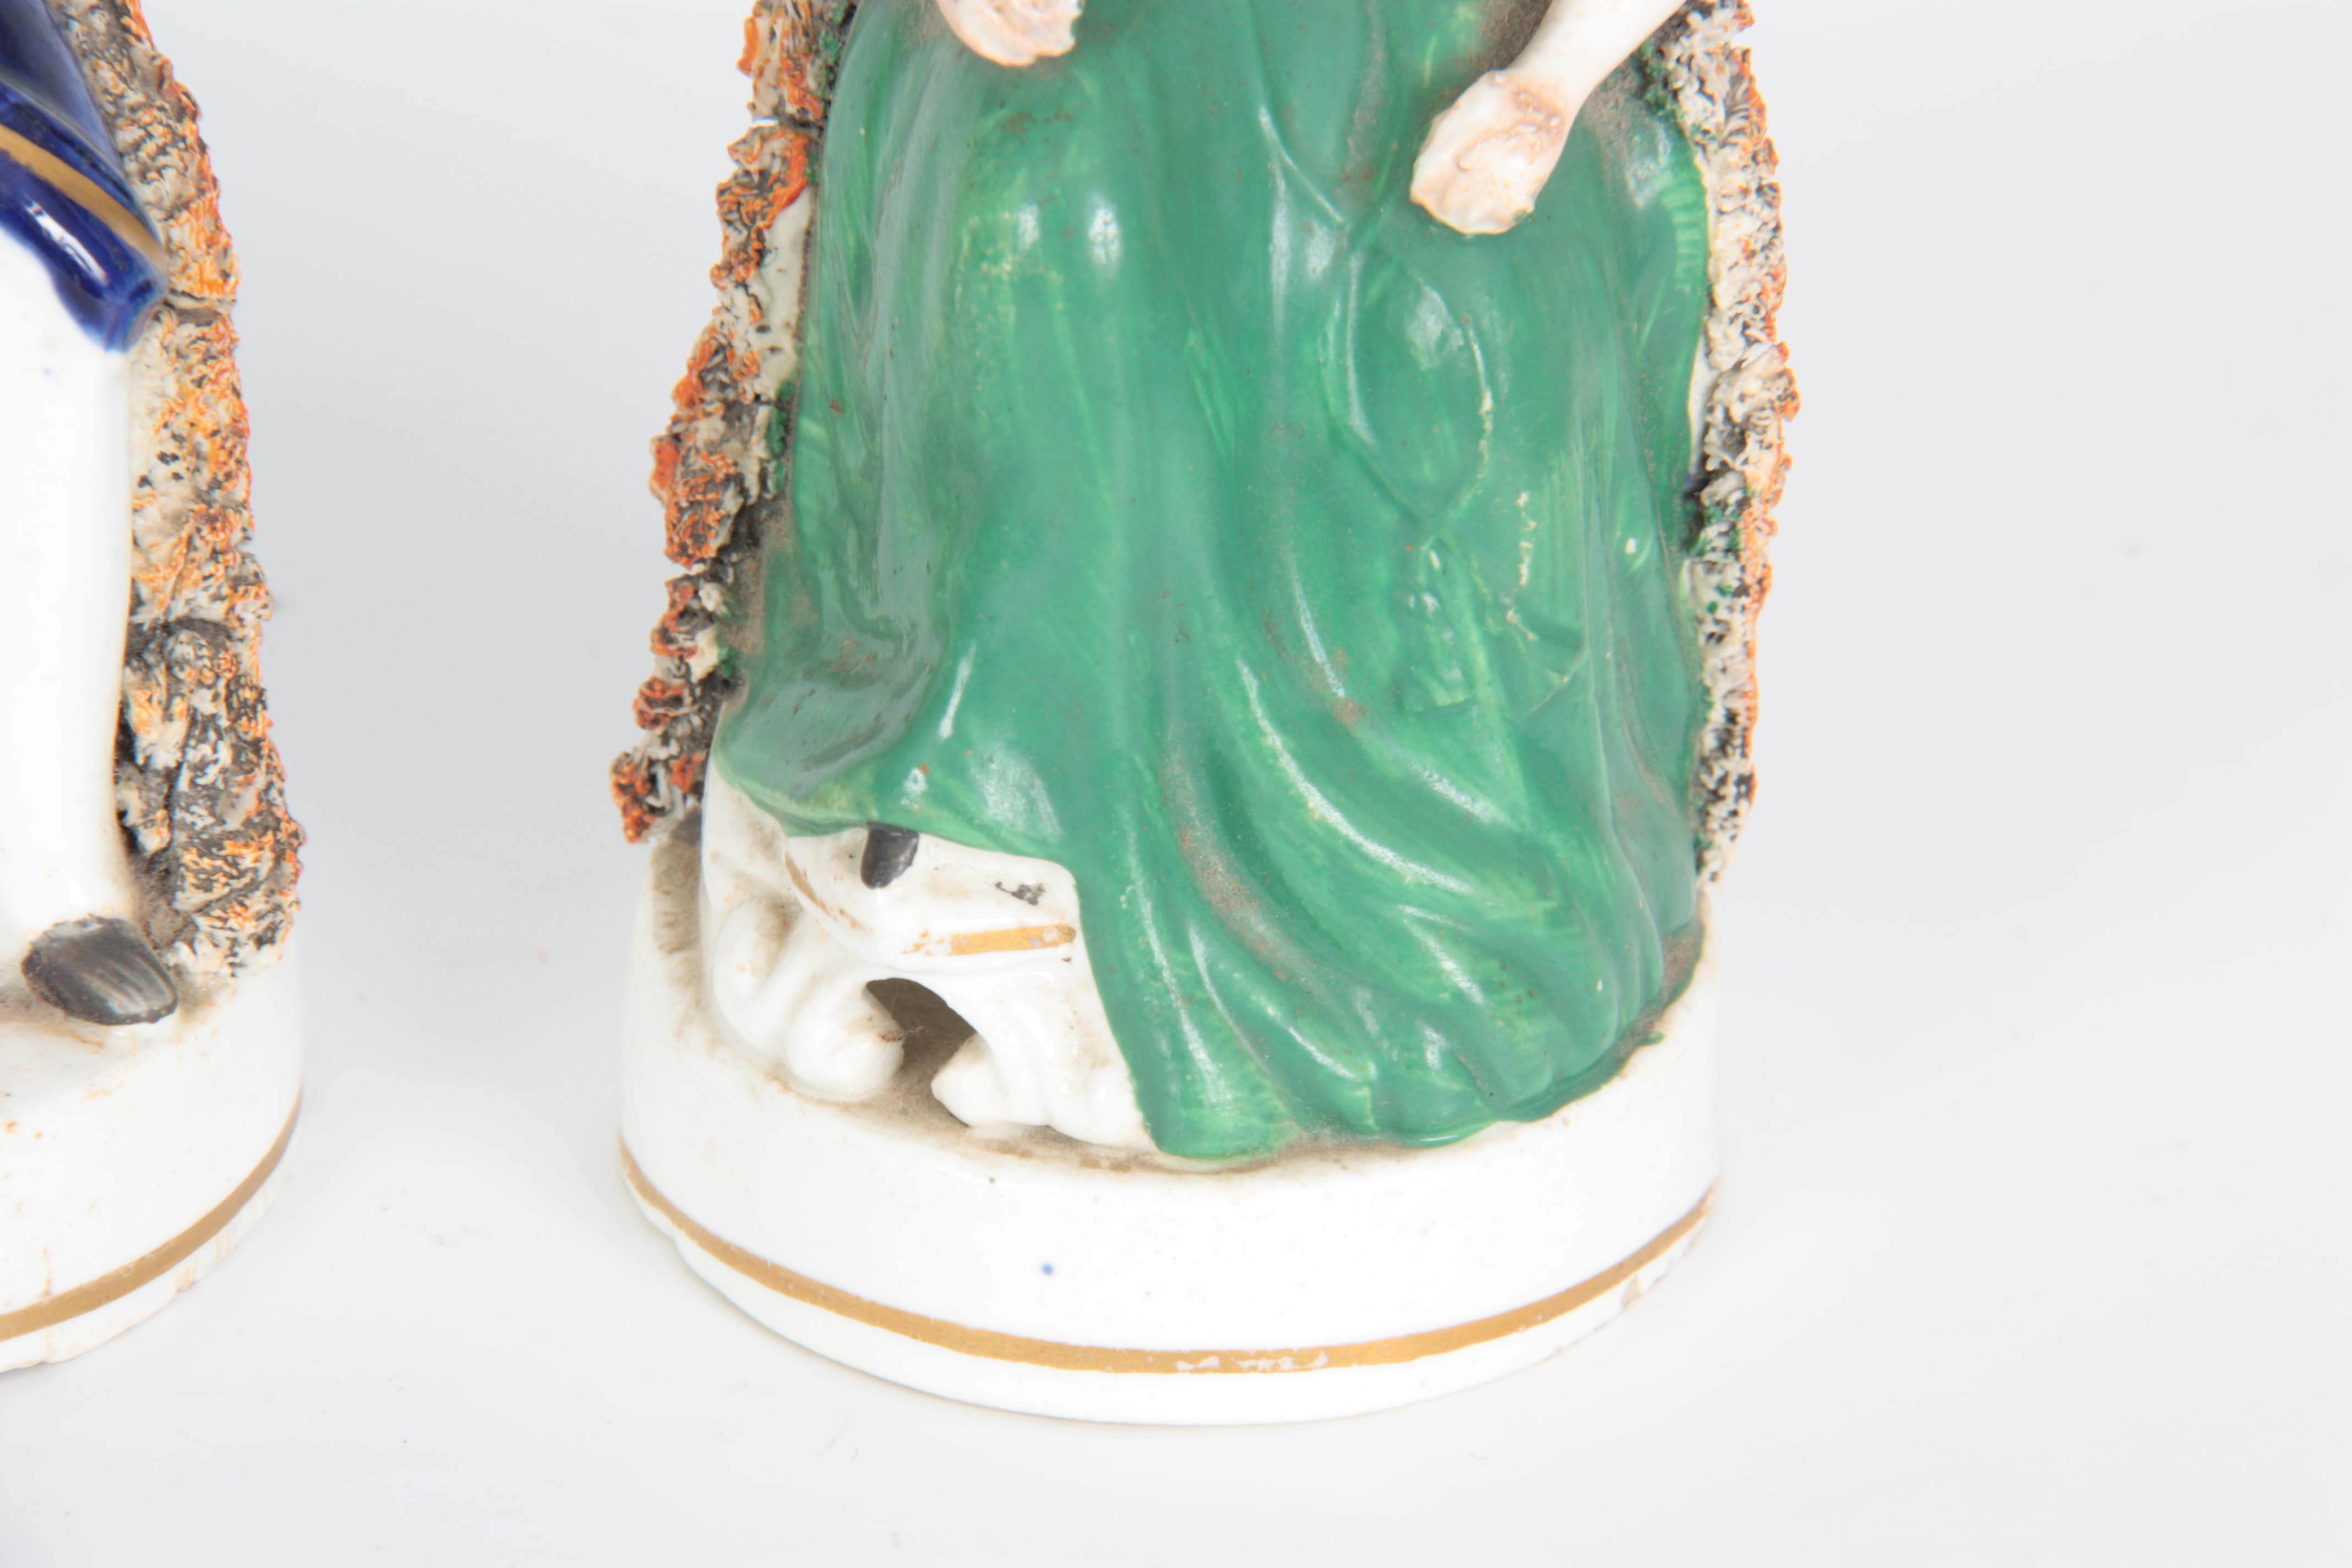 A PAIR OF 19TH CENTURY STAFFORDSHIRE FIGURES depic - Image 4 of 7